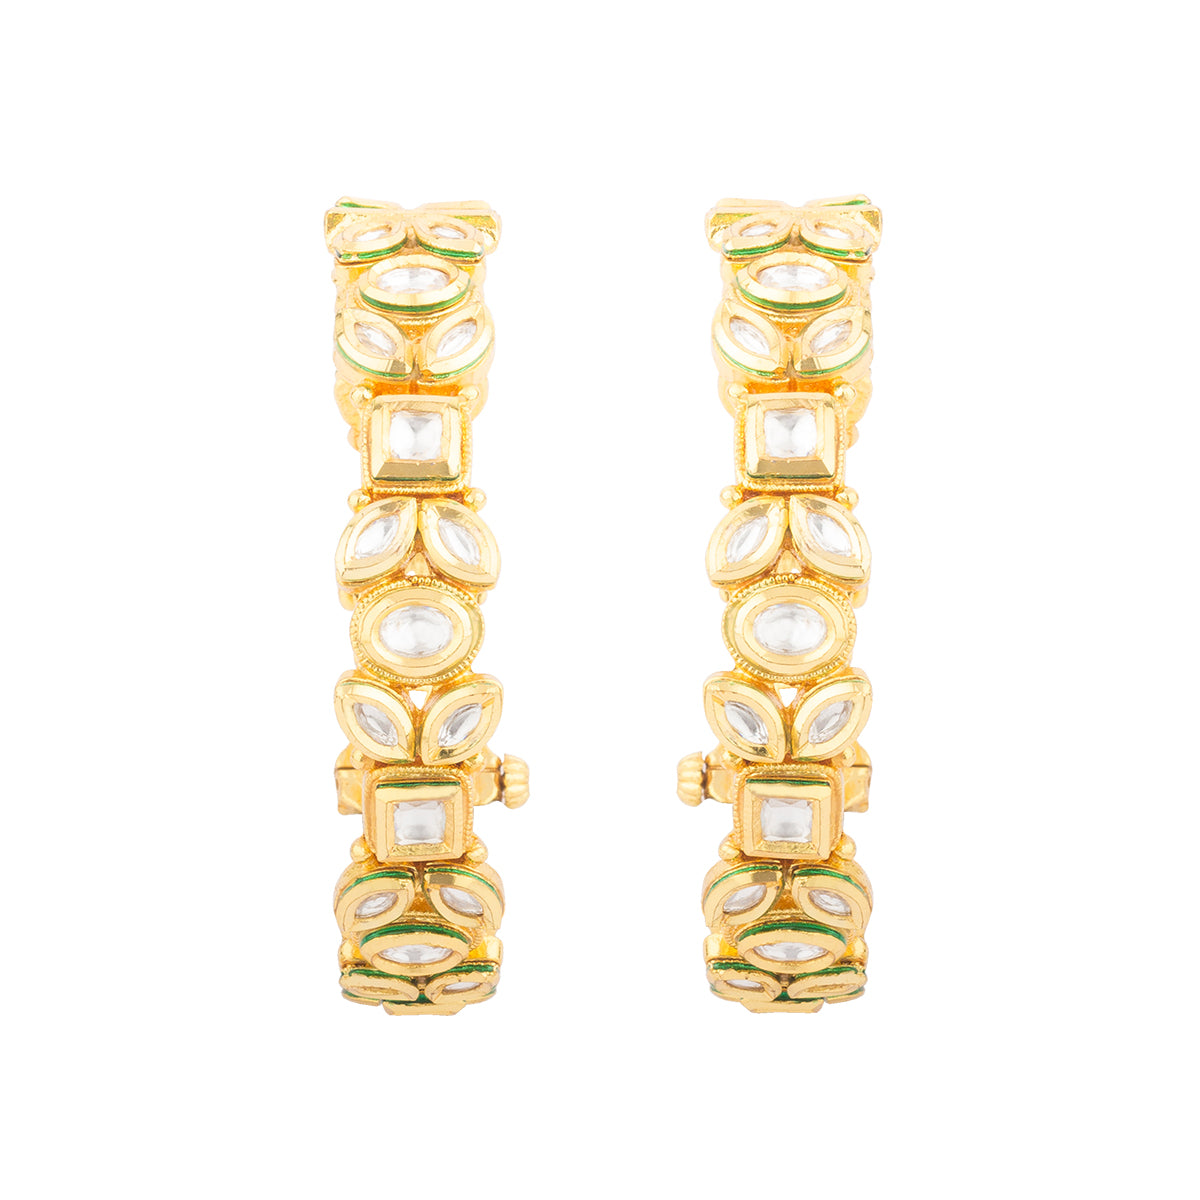 These pair of kadas are finished with uncut stones in floral  pattern giving it a unique look.